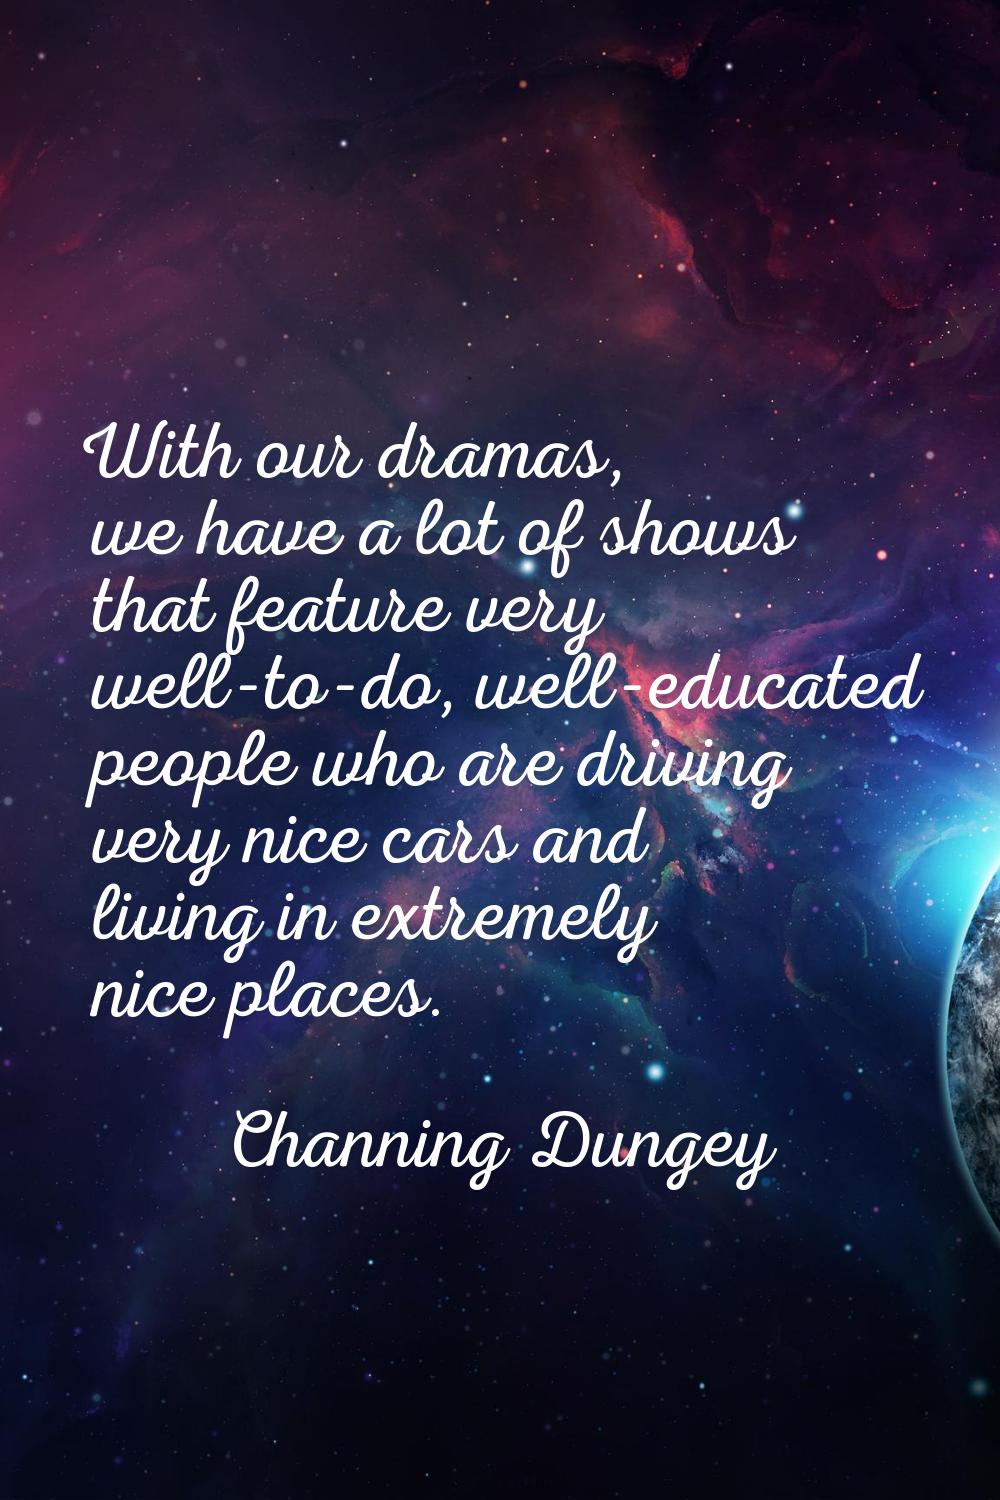 With our dramas, we have a lot of shows that feature very well-to-do, well-educated people who are 